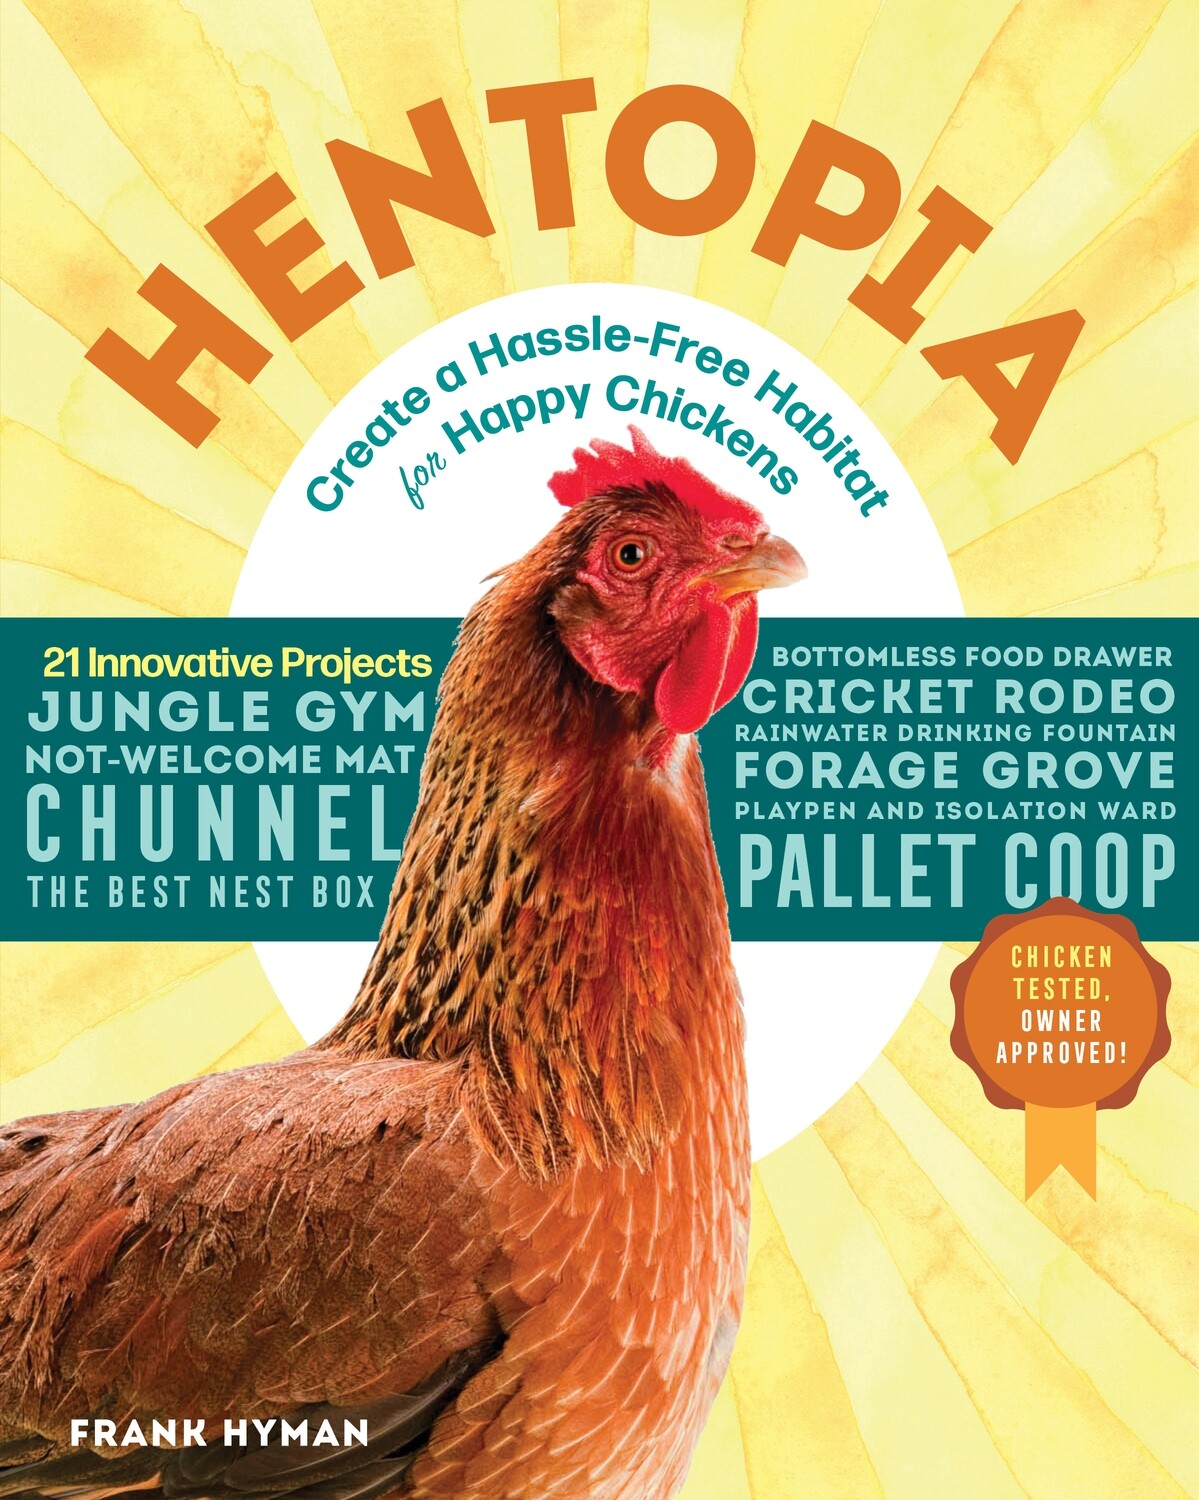 Hentopia: create a hassle-free habitat for happy chickens